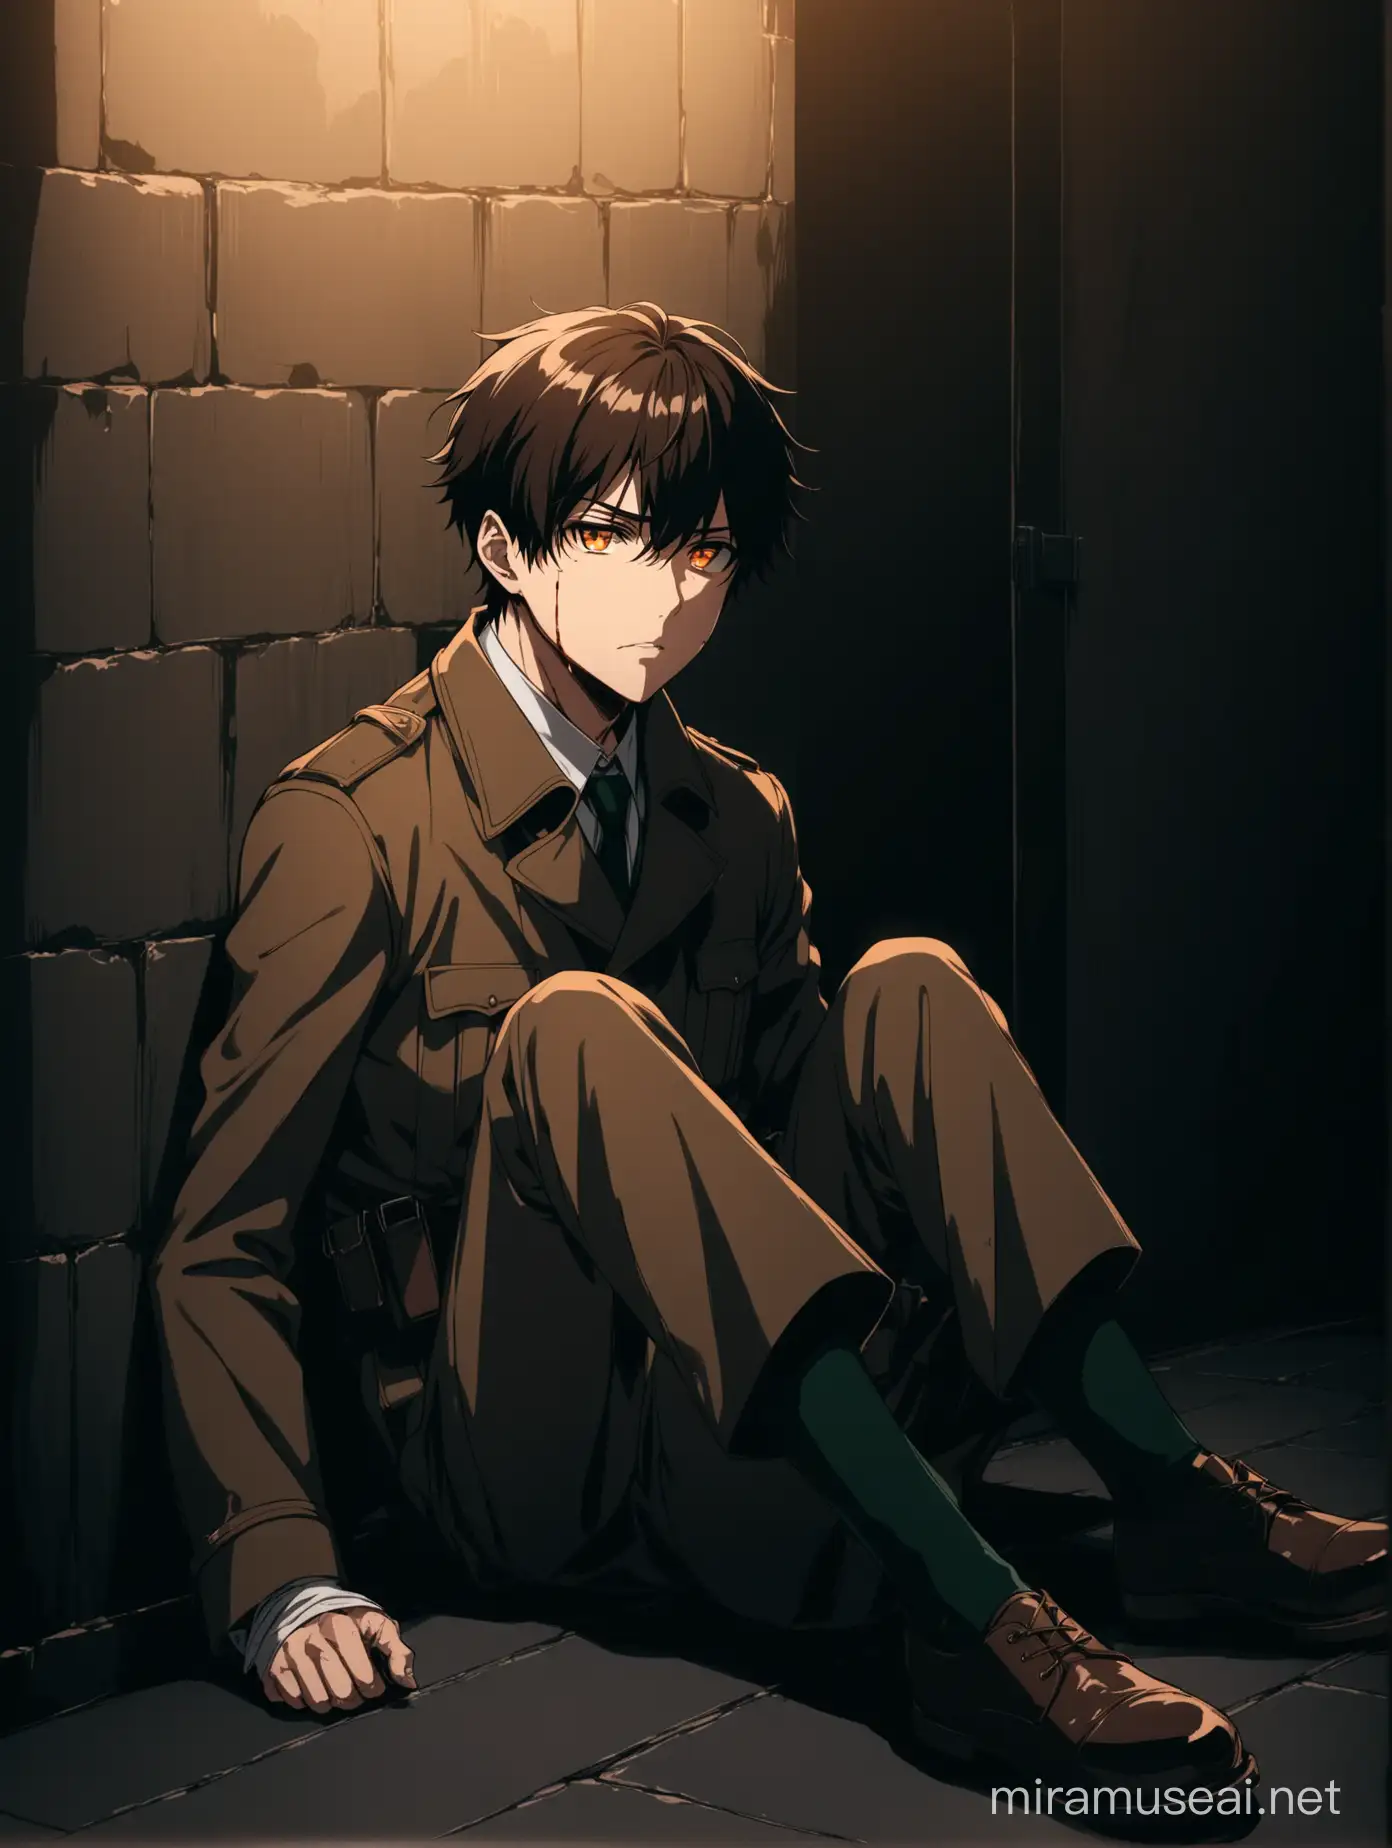 An image of face of an anime male character wearing detective clothes and sitting on a floor supporting a wall as he is injured badly and unconscious. He is in underground secret room with dark green contrasts and vibe. He is dark brown headed and orange eyes. The image should be of his front face